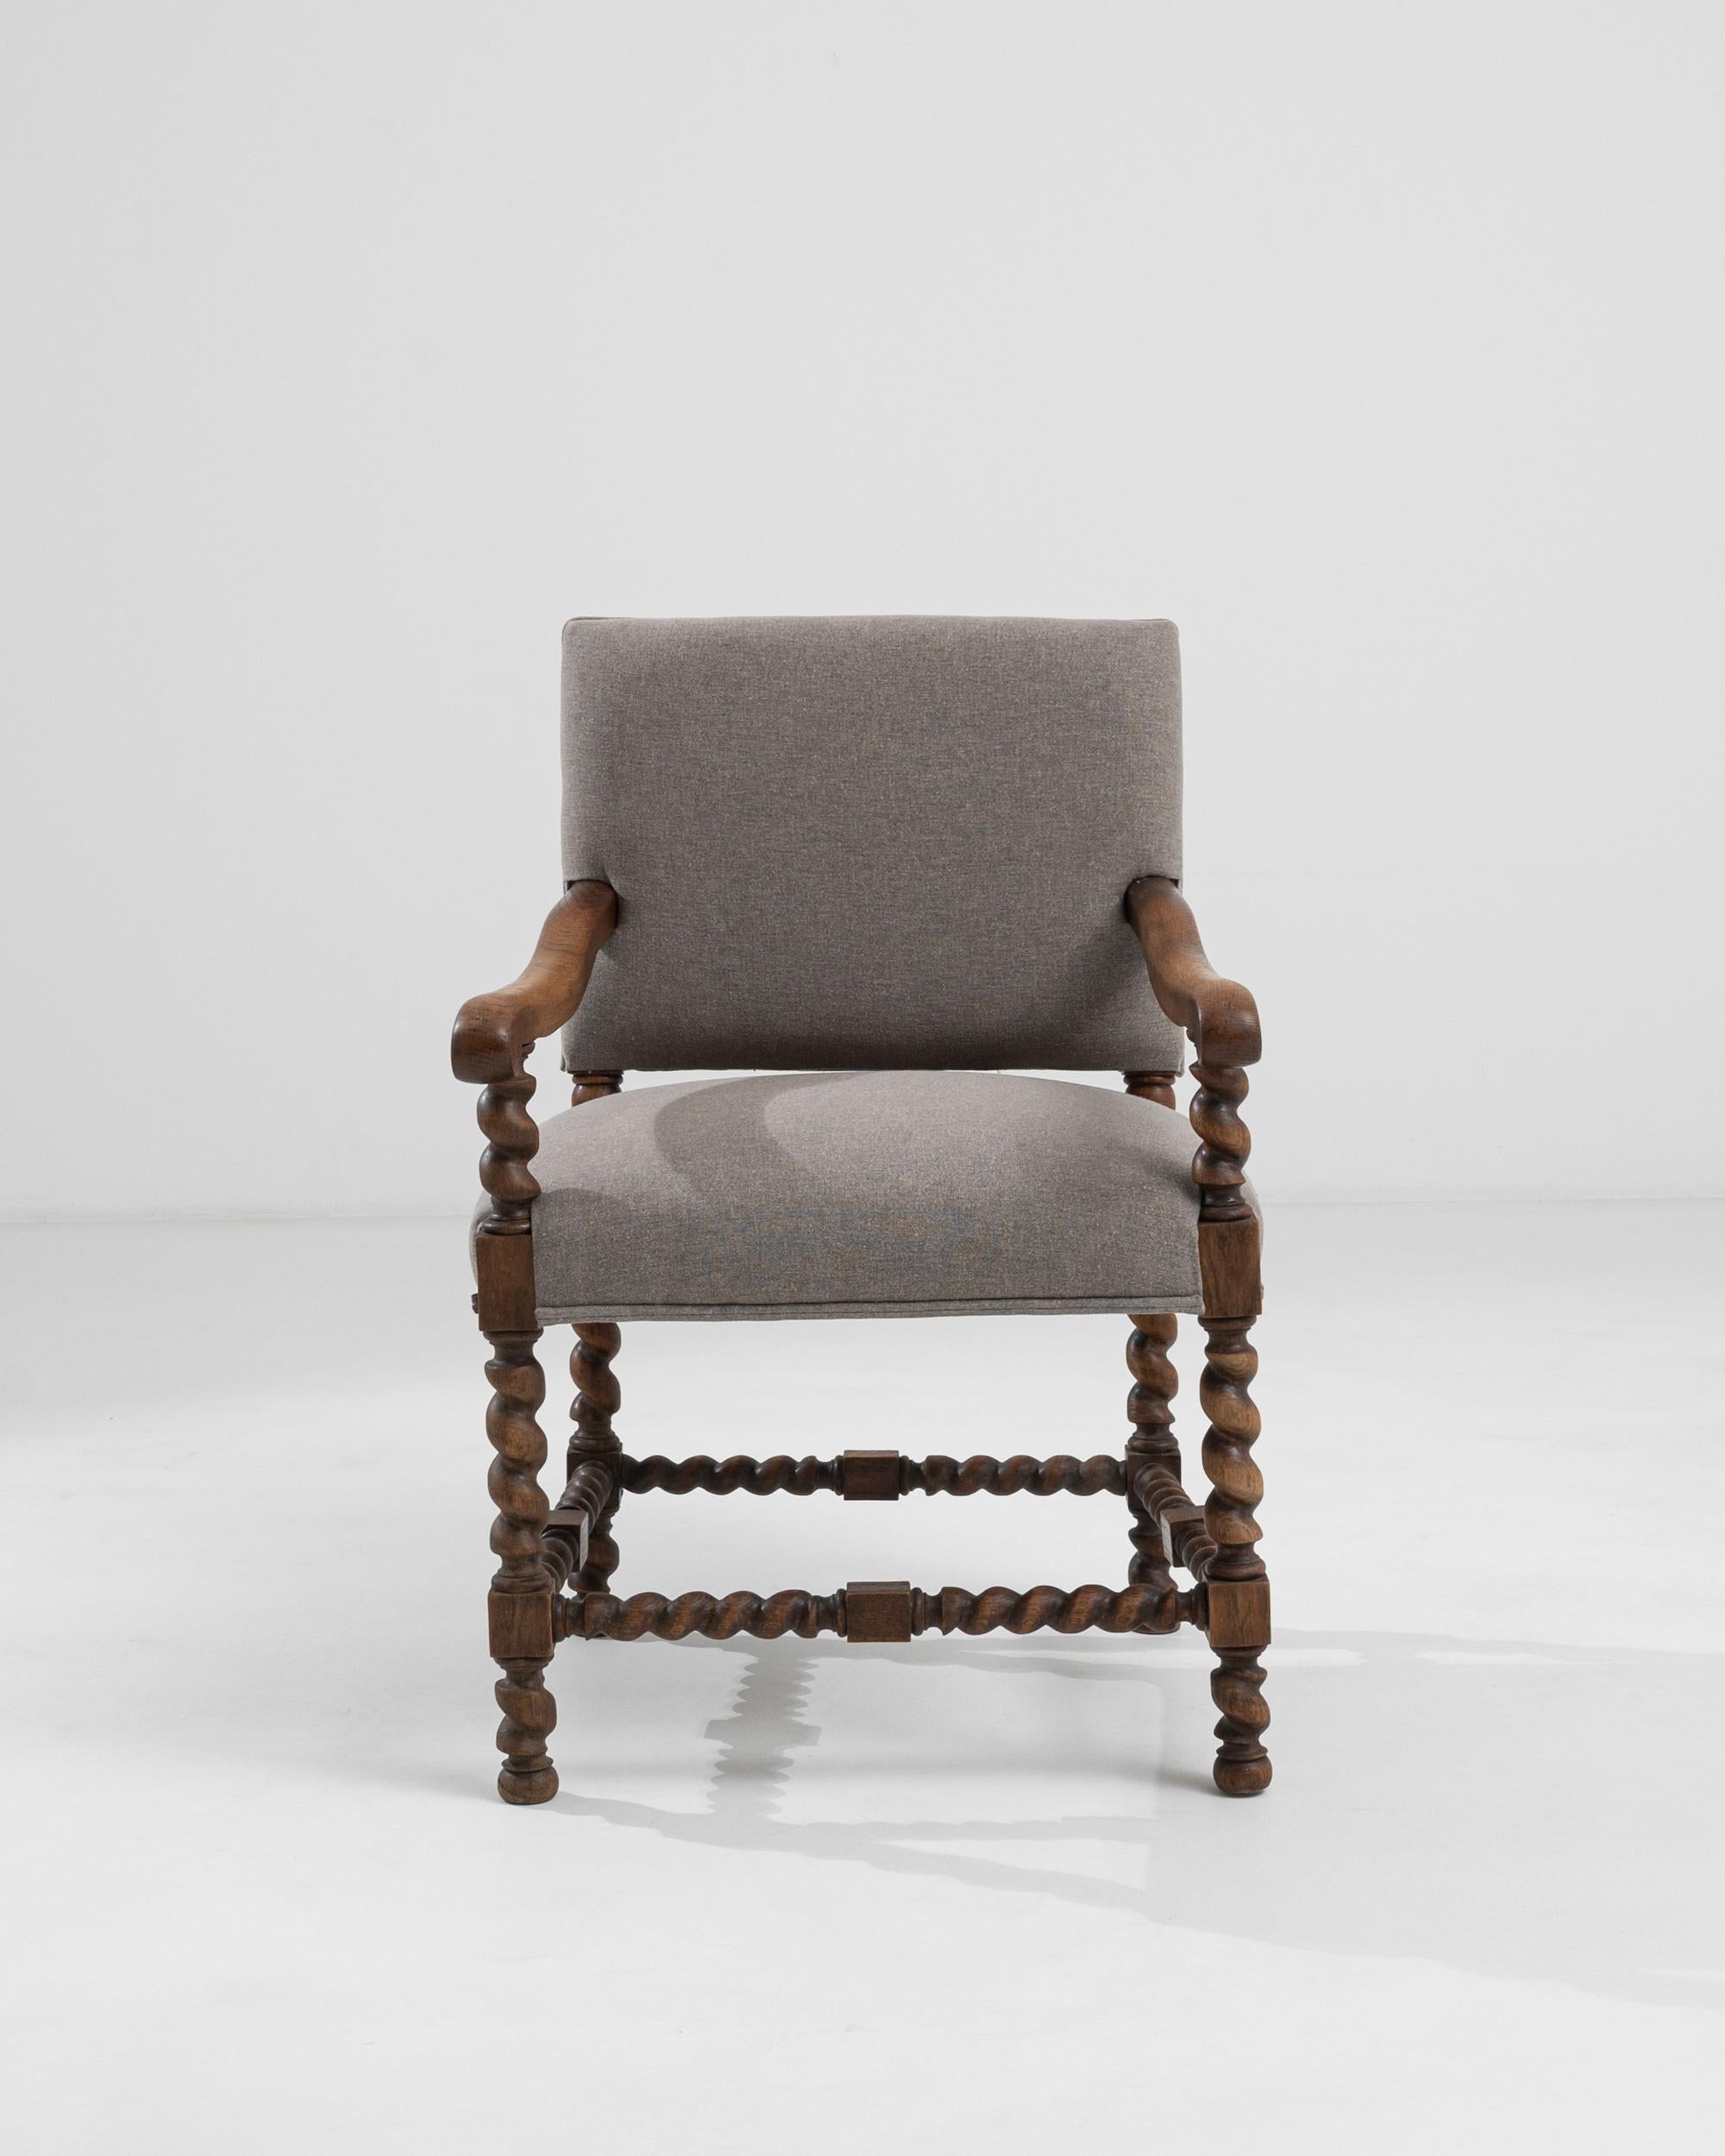 A hardwood armchair with an upholstered seat and backrest from France, circa 1910. A warm and pleasing glow emits from the rich brown oak that composes this elegant chair. The throne-like frame is embellished with elaborate carving, fashions of the